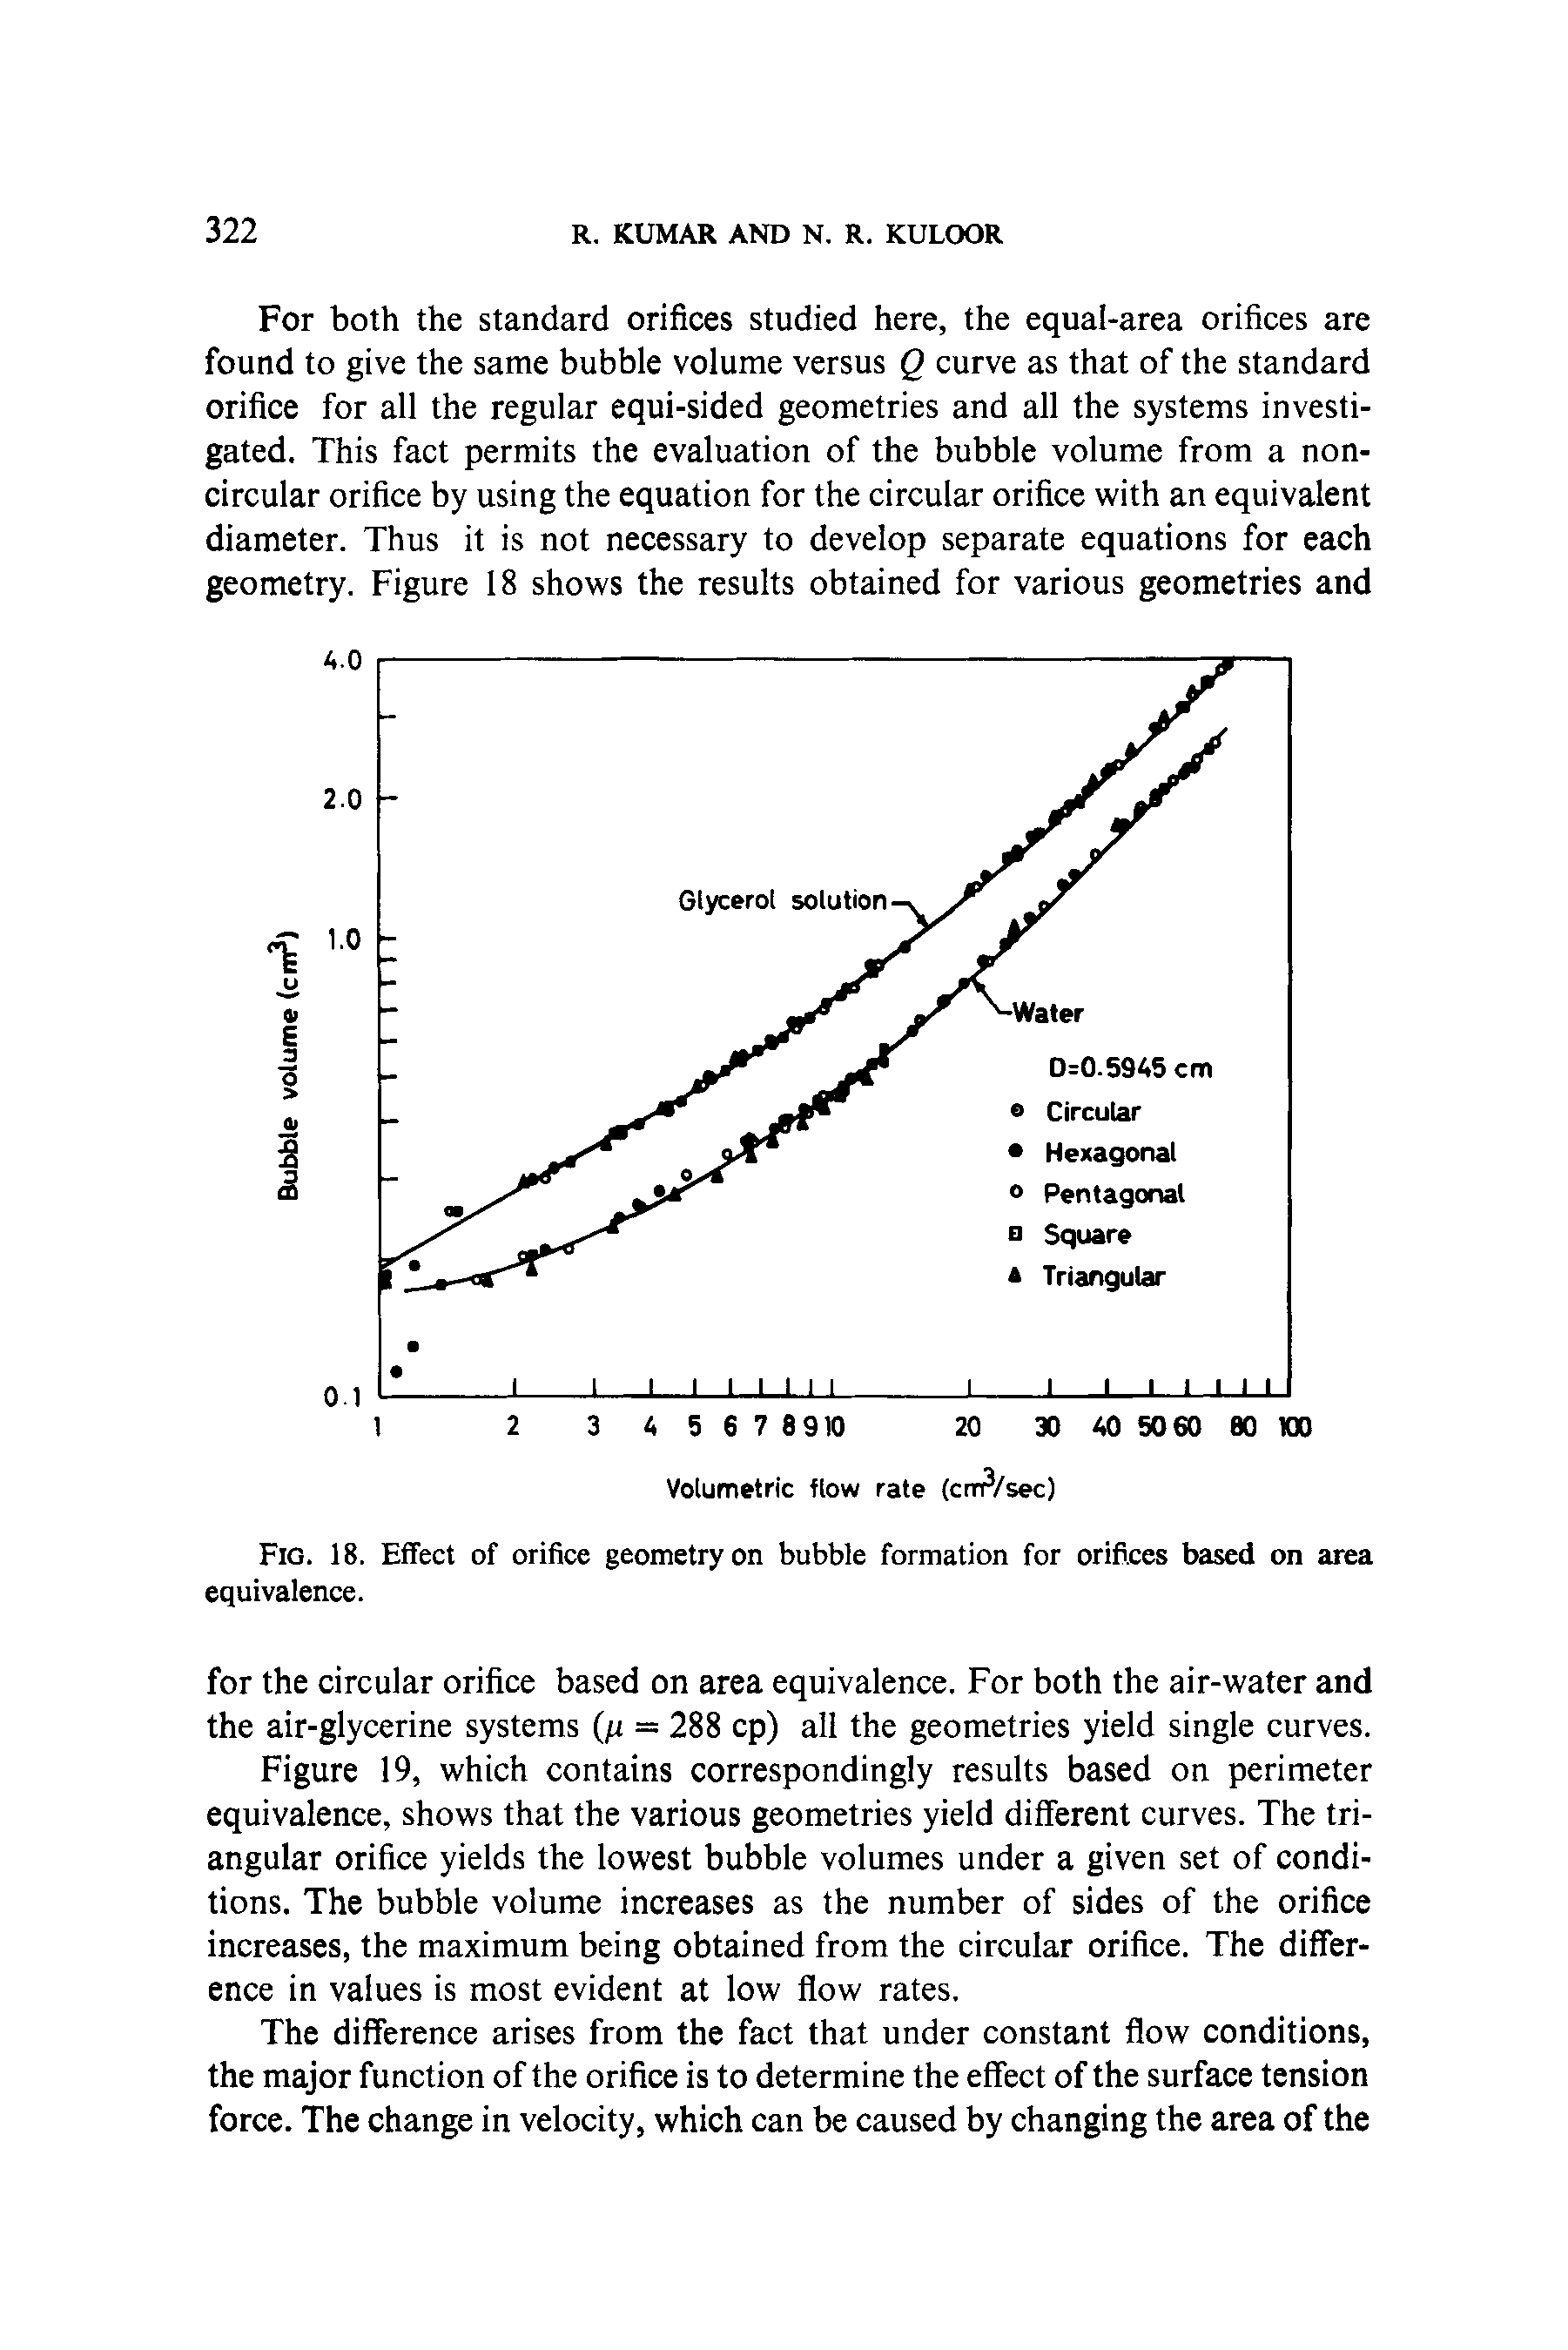 Fig. 18. Effect of orifice geometry on bubble formation for orifices based on area equivalence.